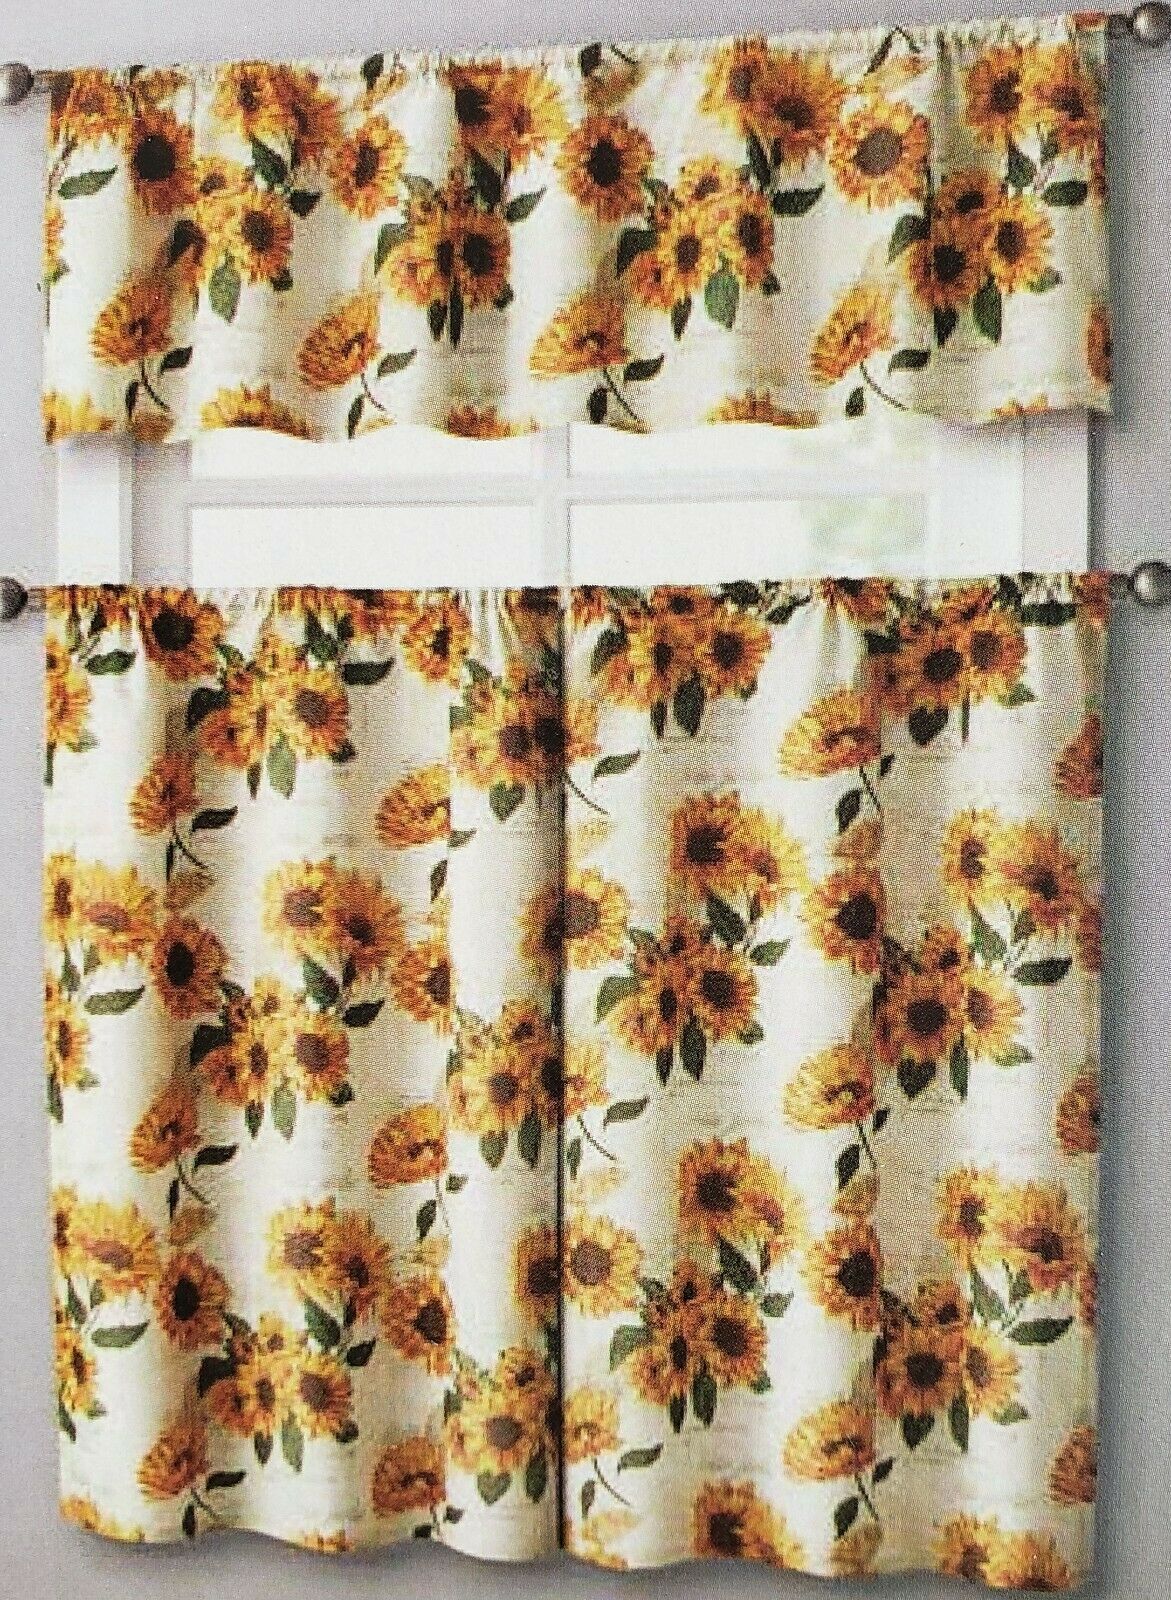 Primary image for 3 pc. Curtains Set: Valance (56"x14") & 2 Tiers (28"x36") SUNFLOWERS FIELD, VC